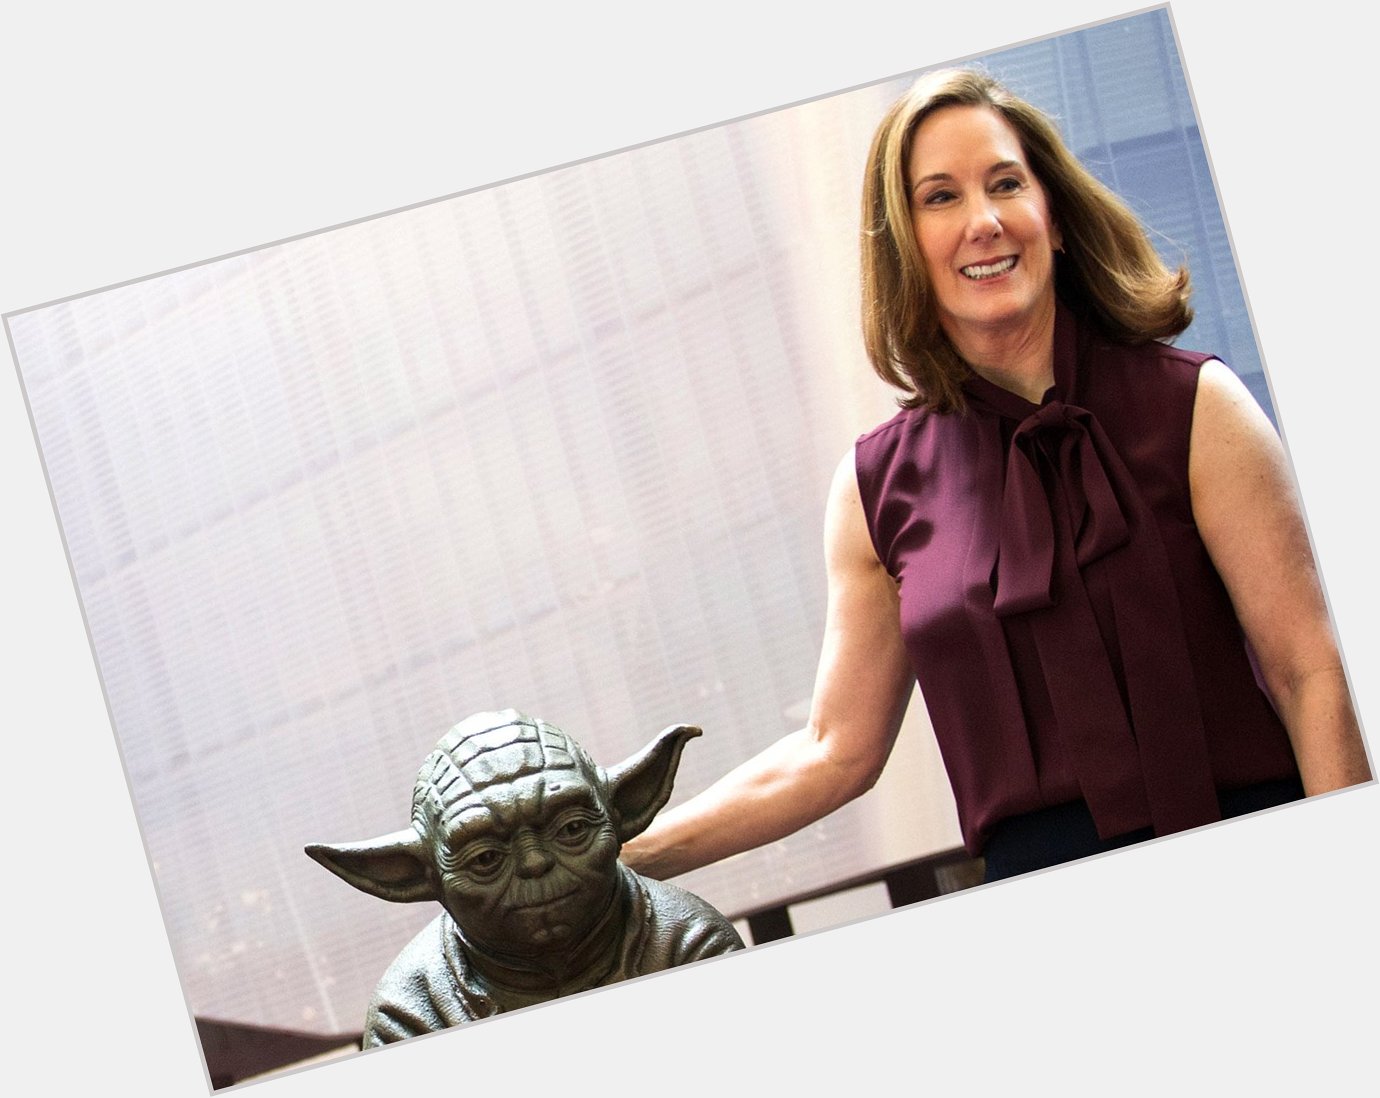 A little late but happy birthday to Kathleen Kennedy, one of the greatest film producers ever 